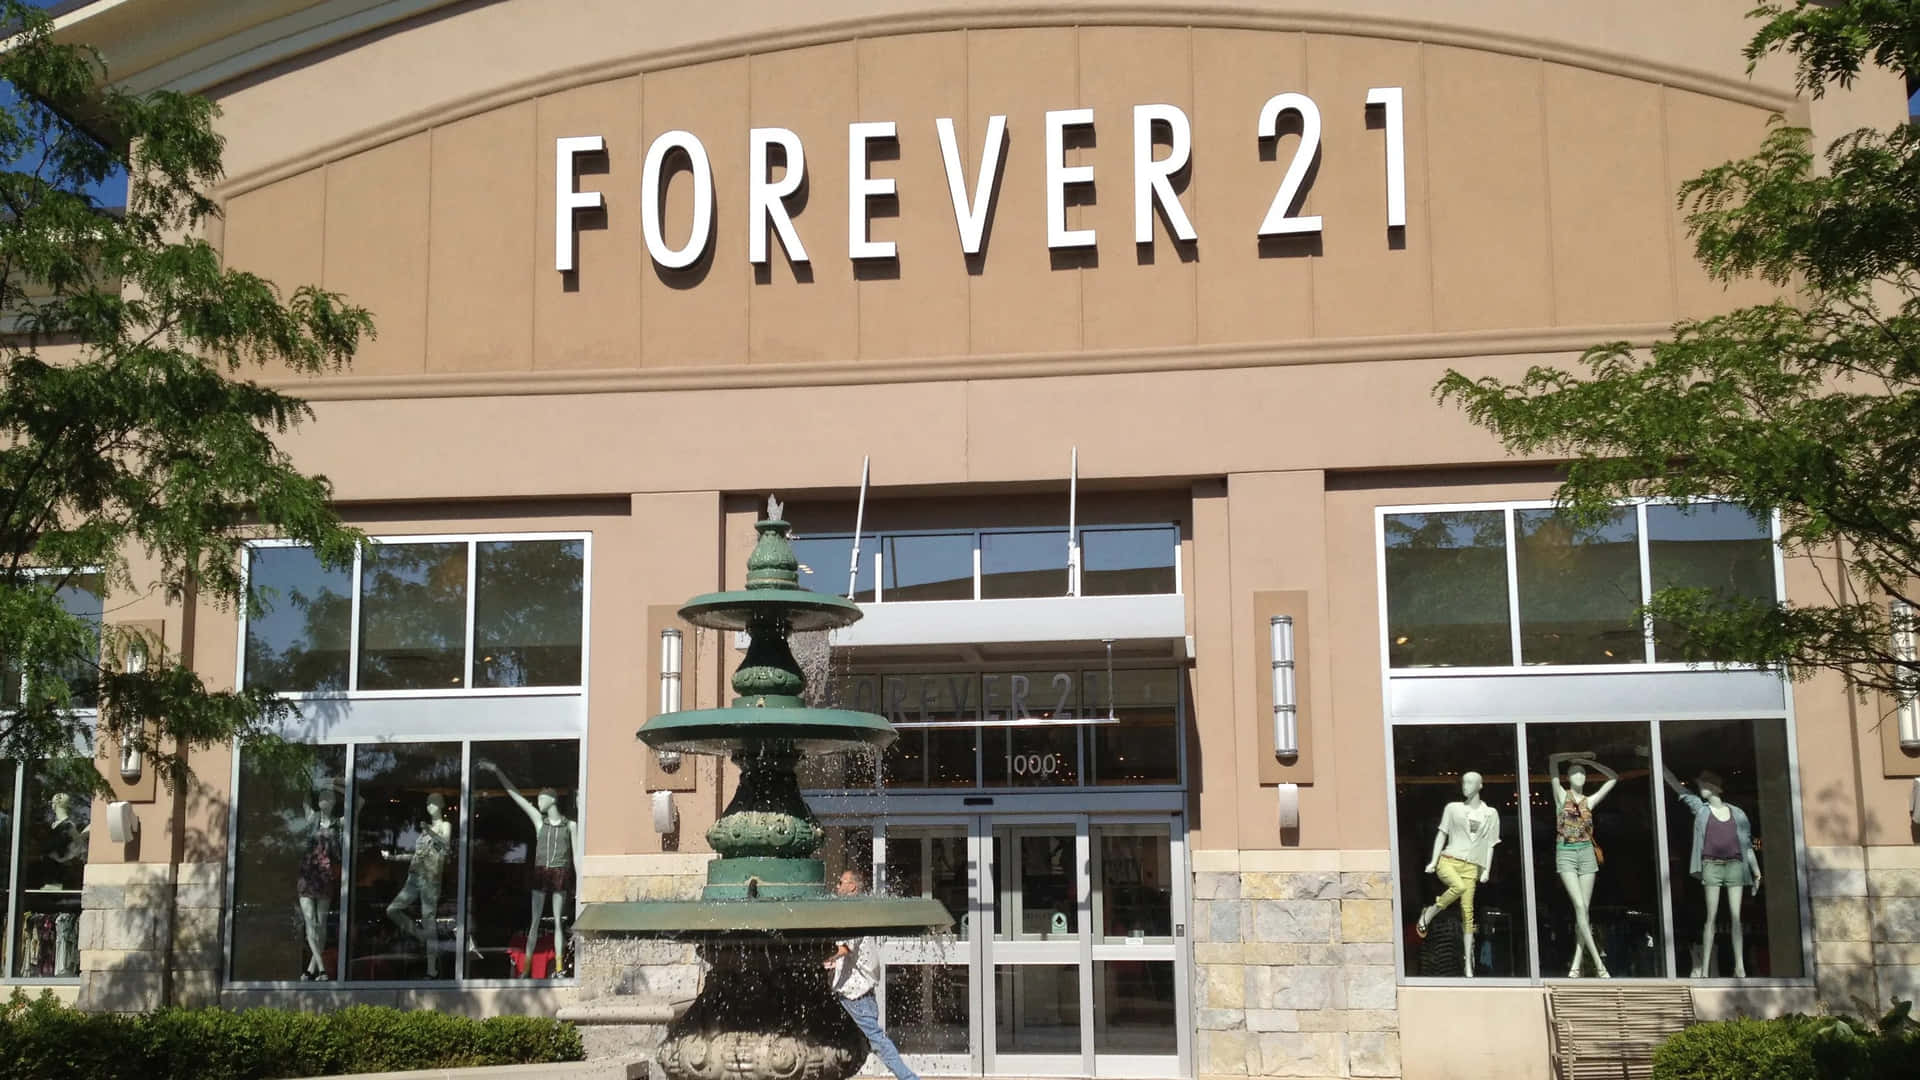 Look stylish and stay comfortable in Forever 21!